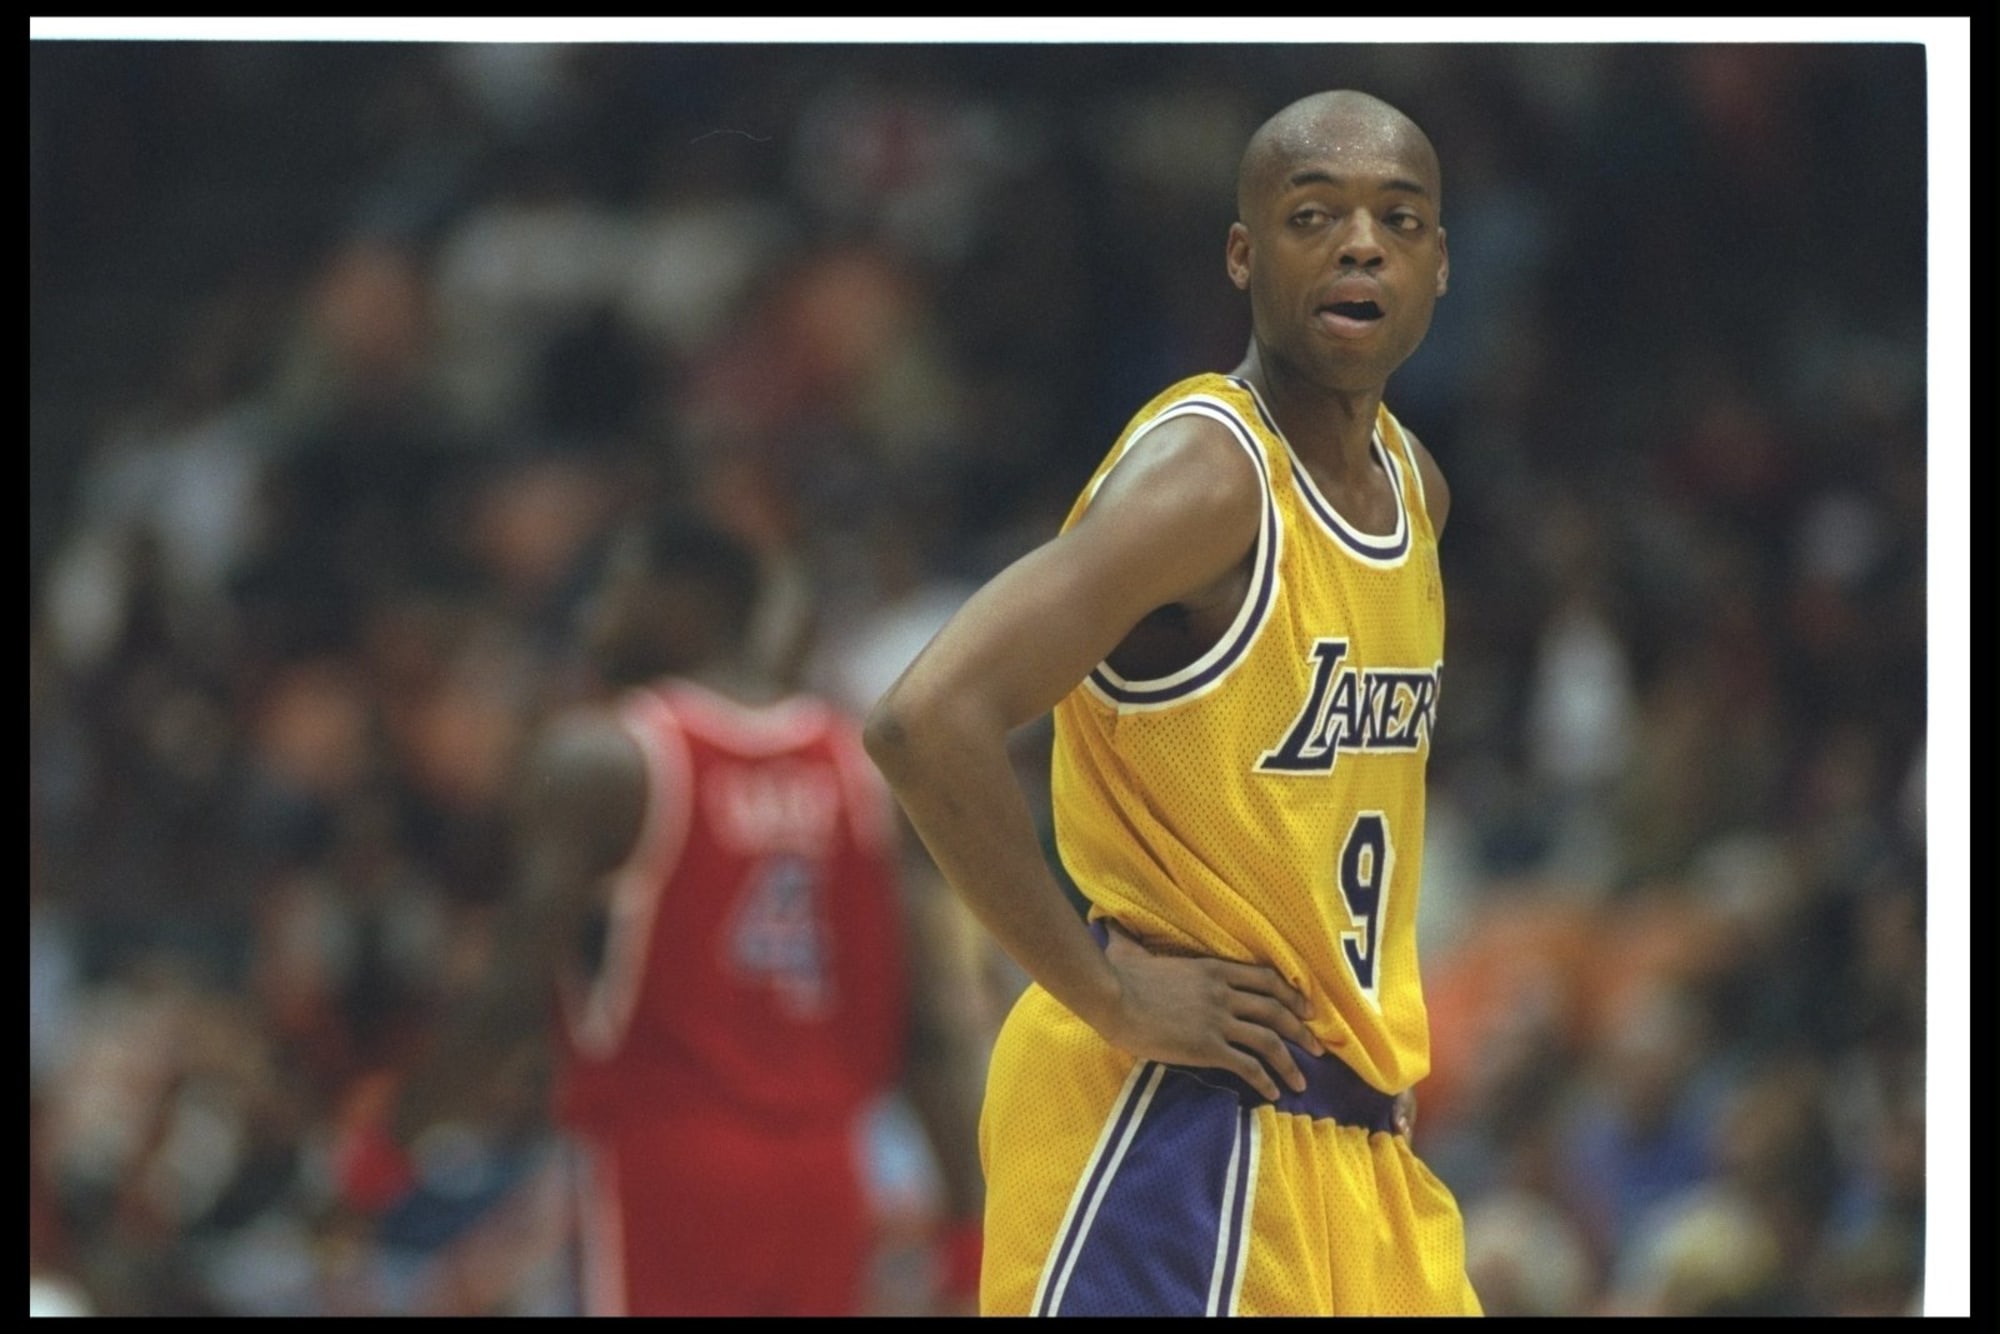 What do Lakers fans think about Nick Van Exel? - Quora